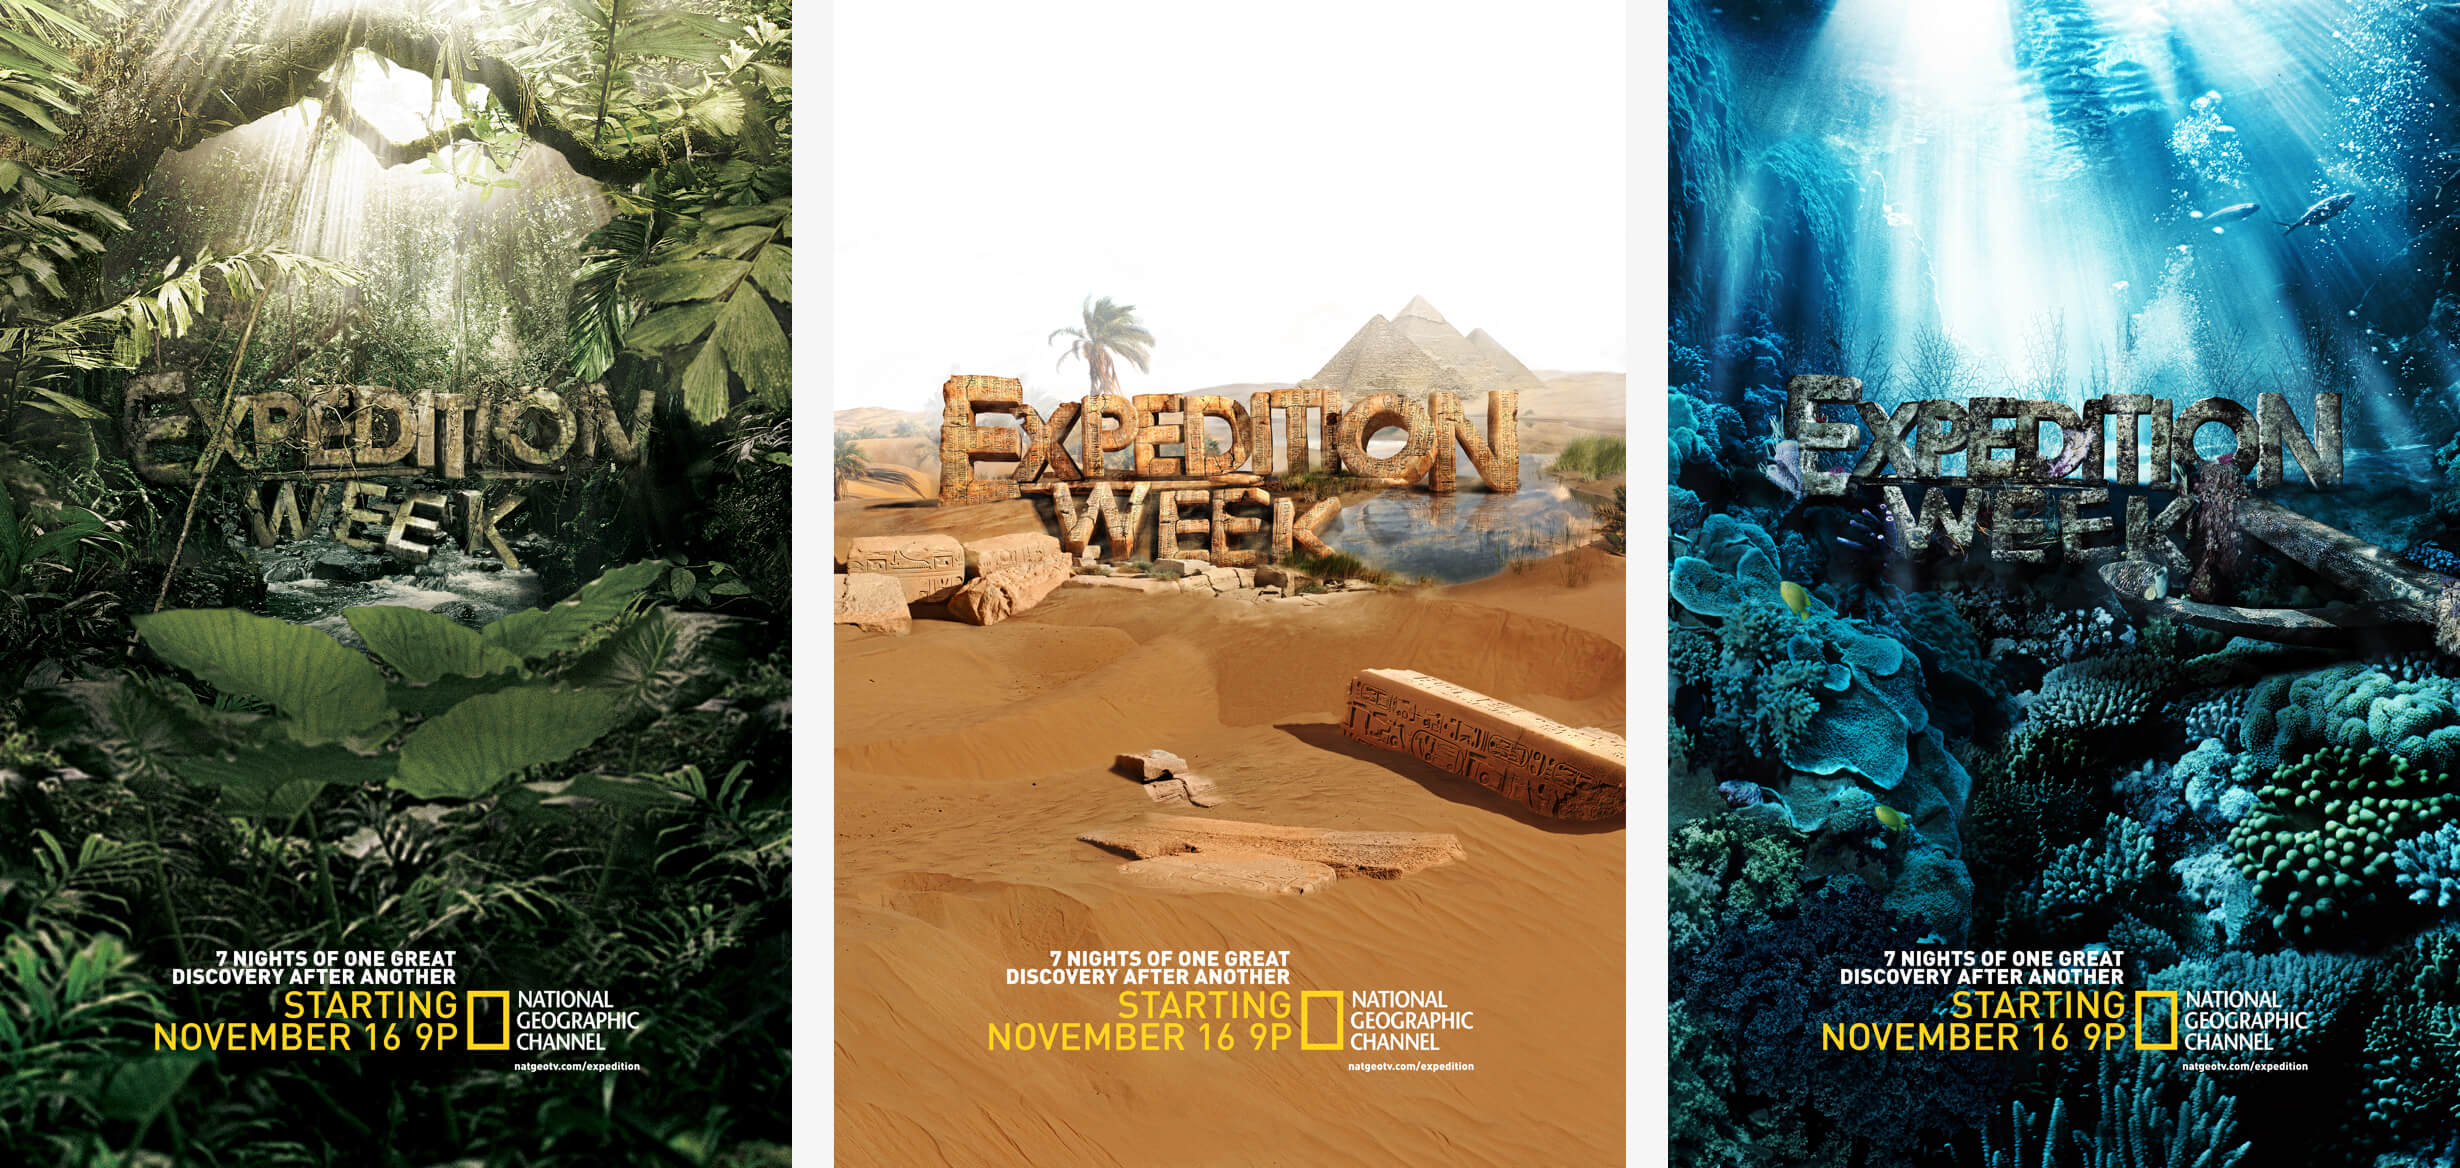 Expedition Week key art posters for National Geographic Channel, Washington, D.C.